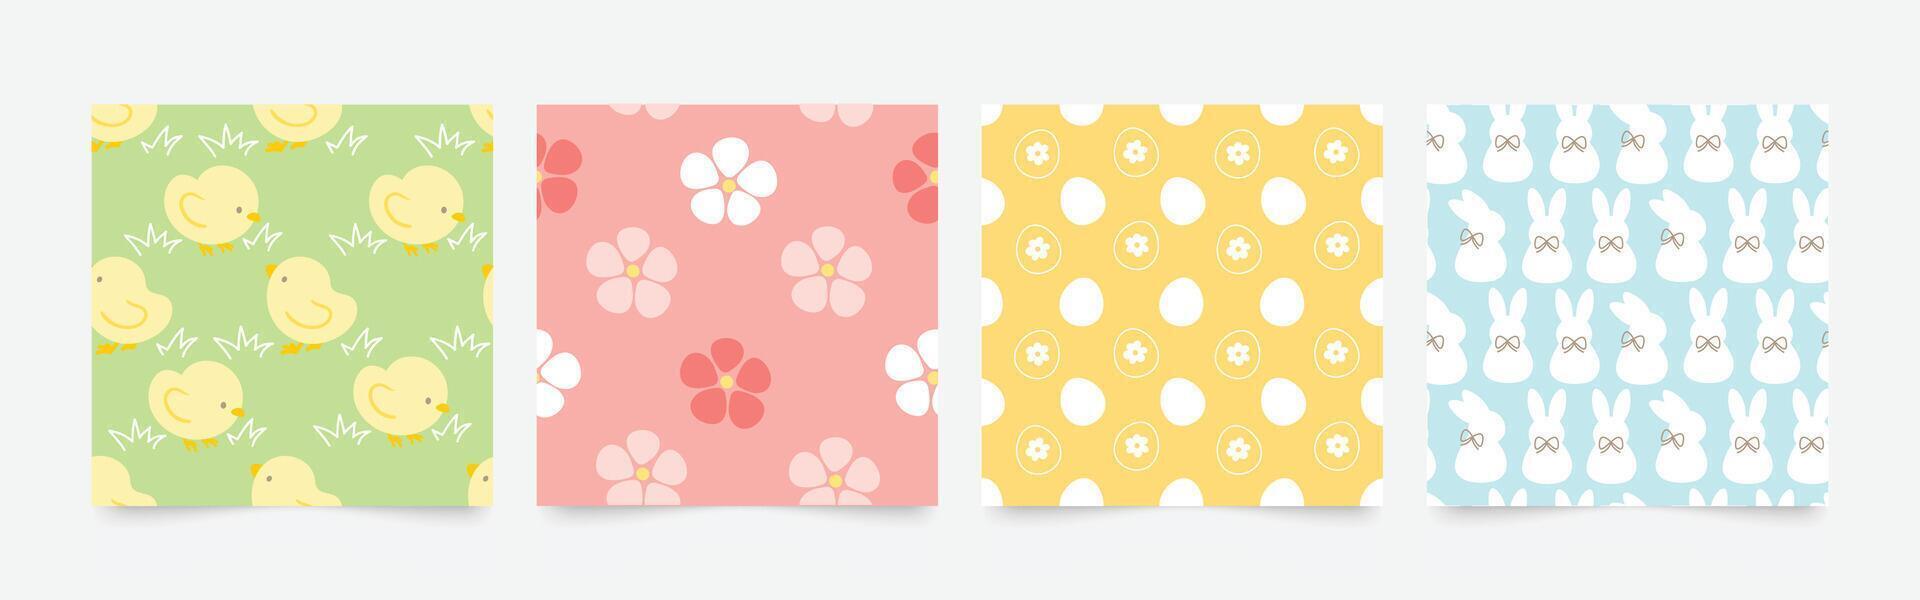 Happy Easter seamless pattern vector. Set of square cover design with easter egg, flower, rabbit, chick. Spring season repeated in fabric pattern for prints, wallpaper, cover, packaging, kids, ads. vector